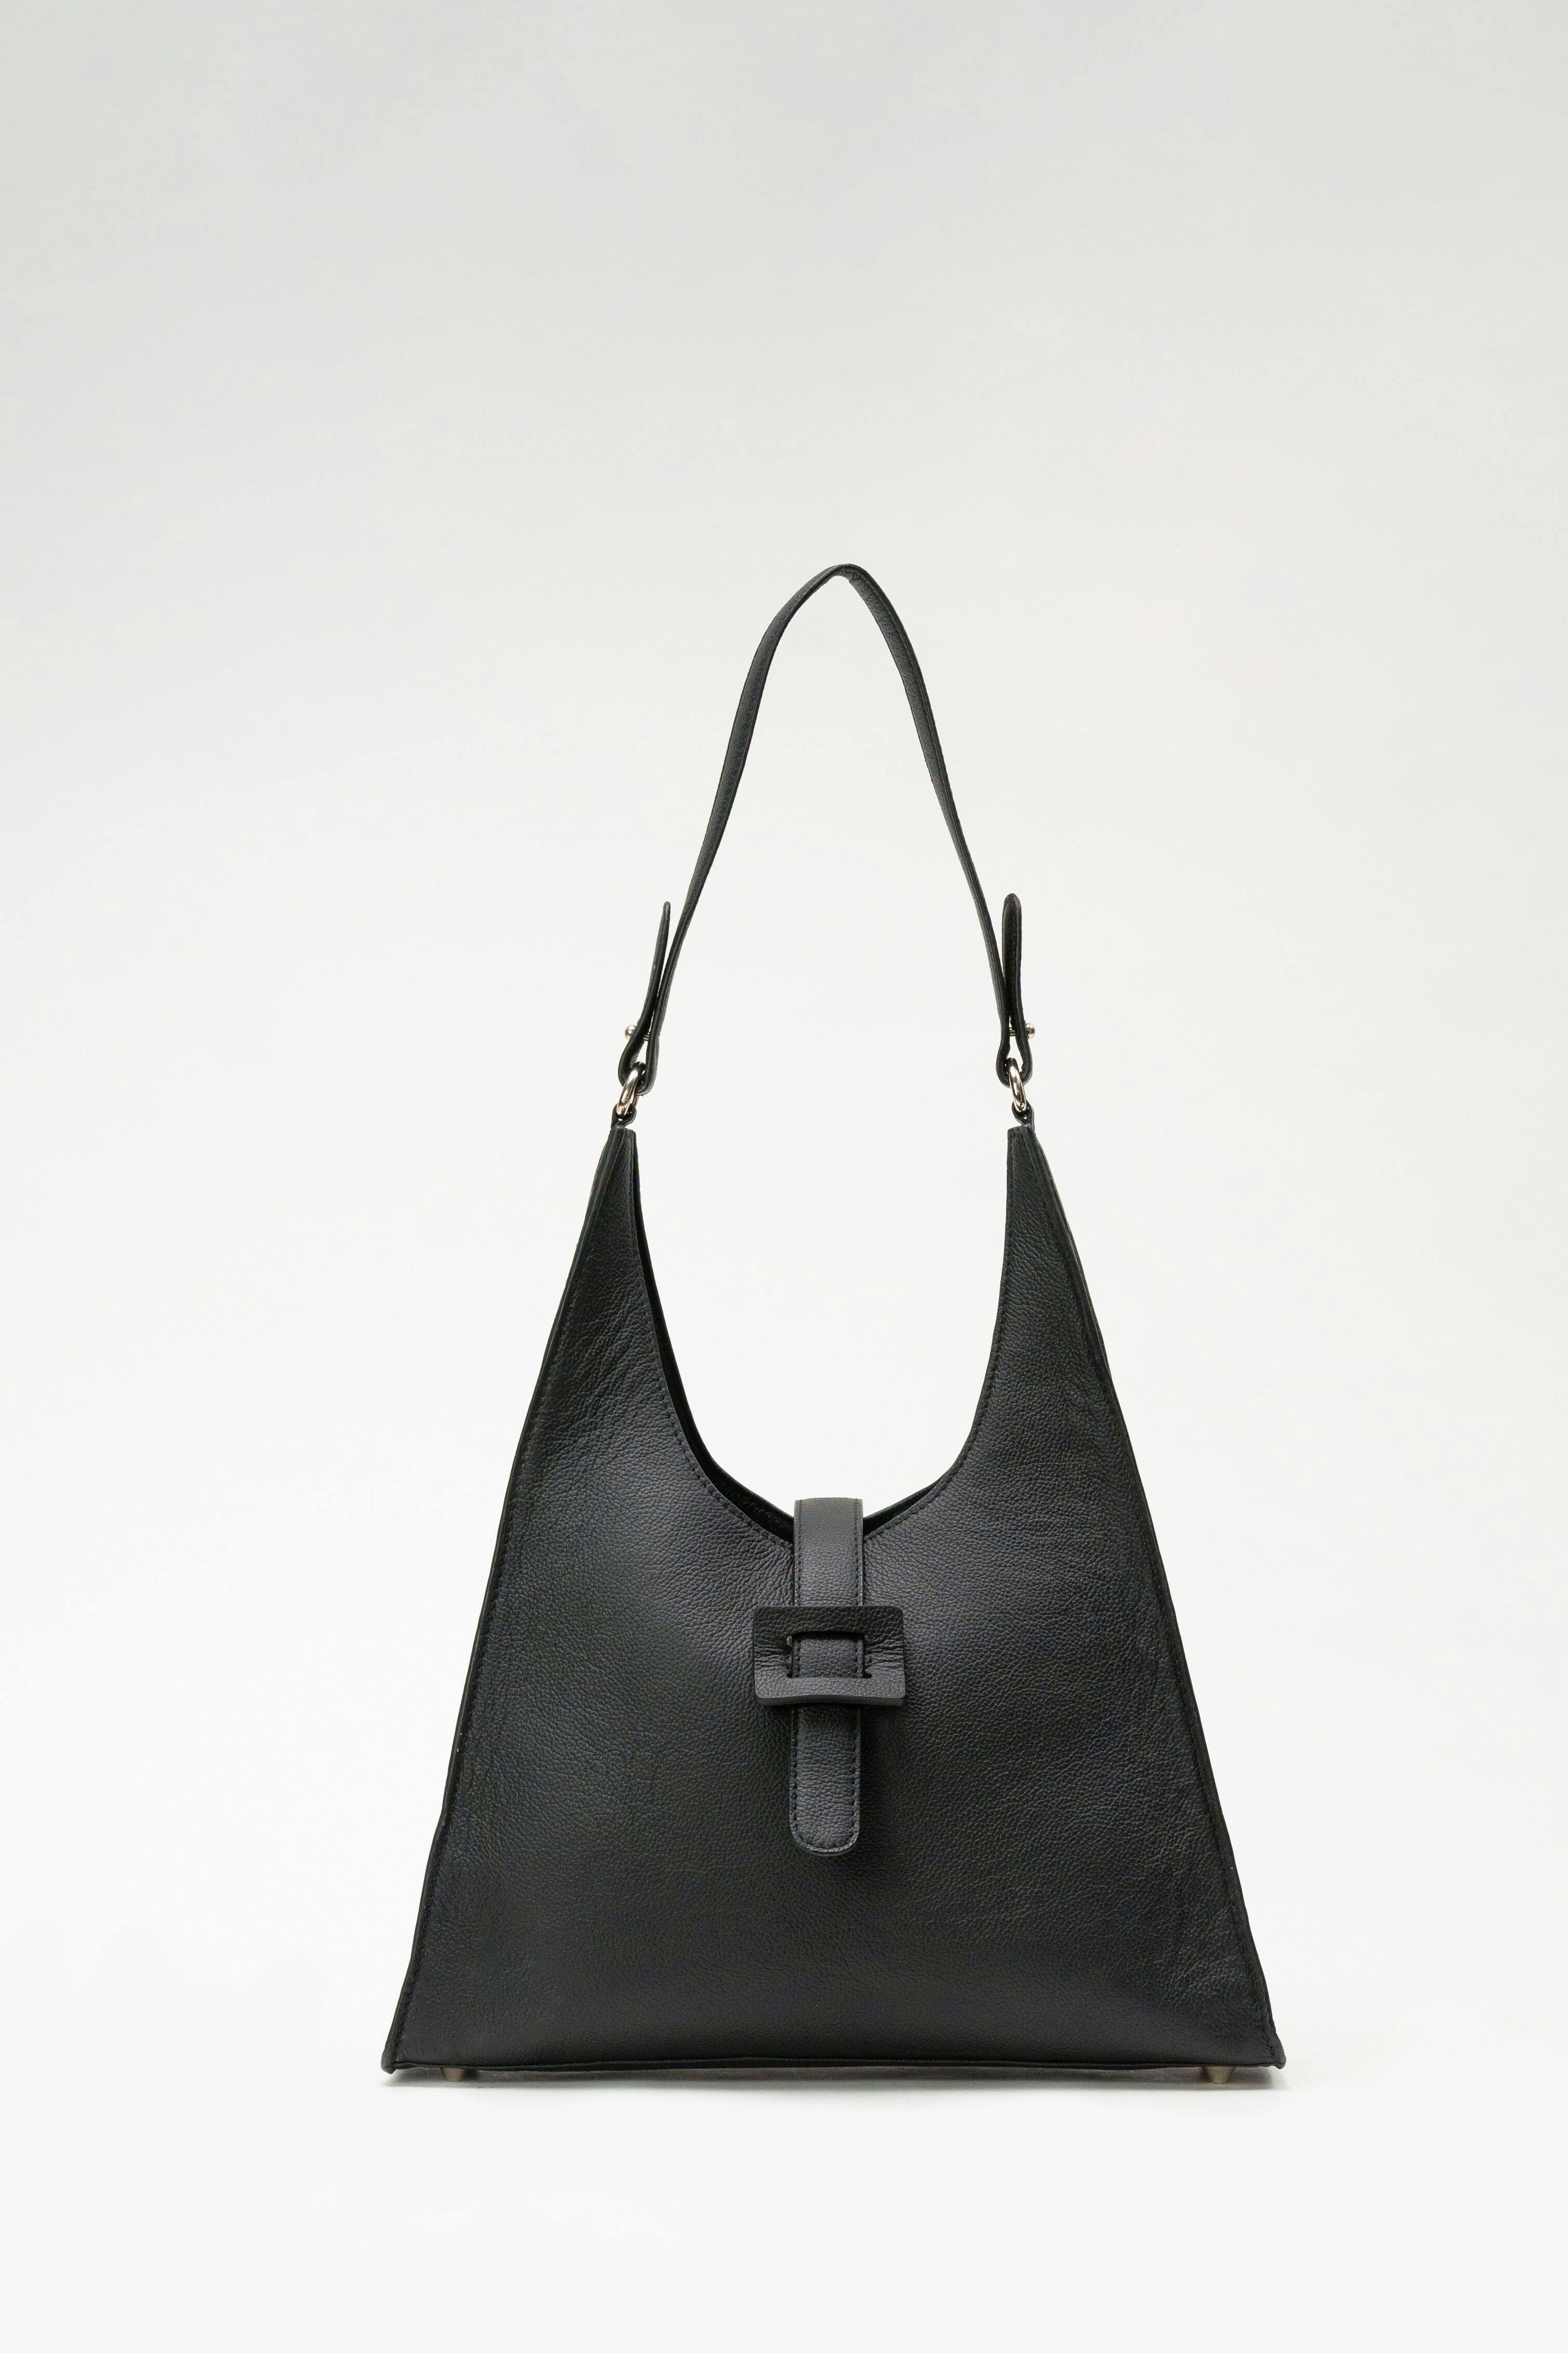 Aizah in Pebbled Black with Buckle Details, a product by Mistry 